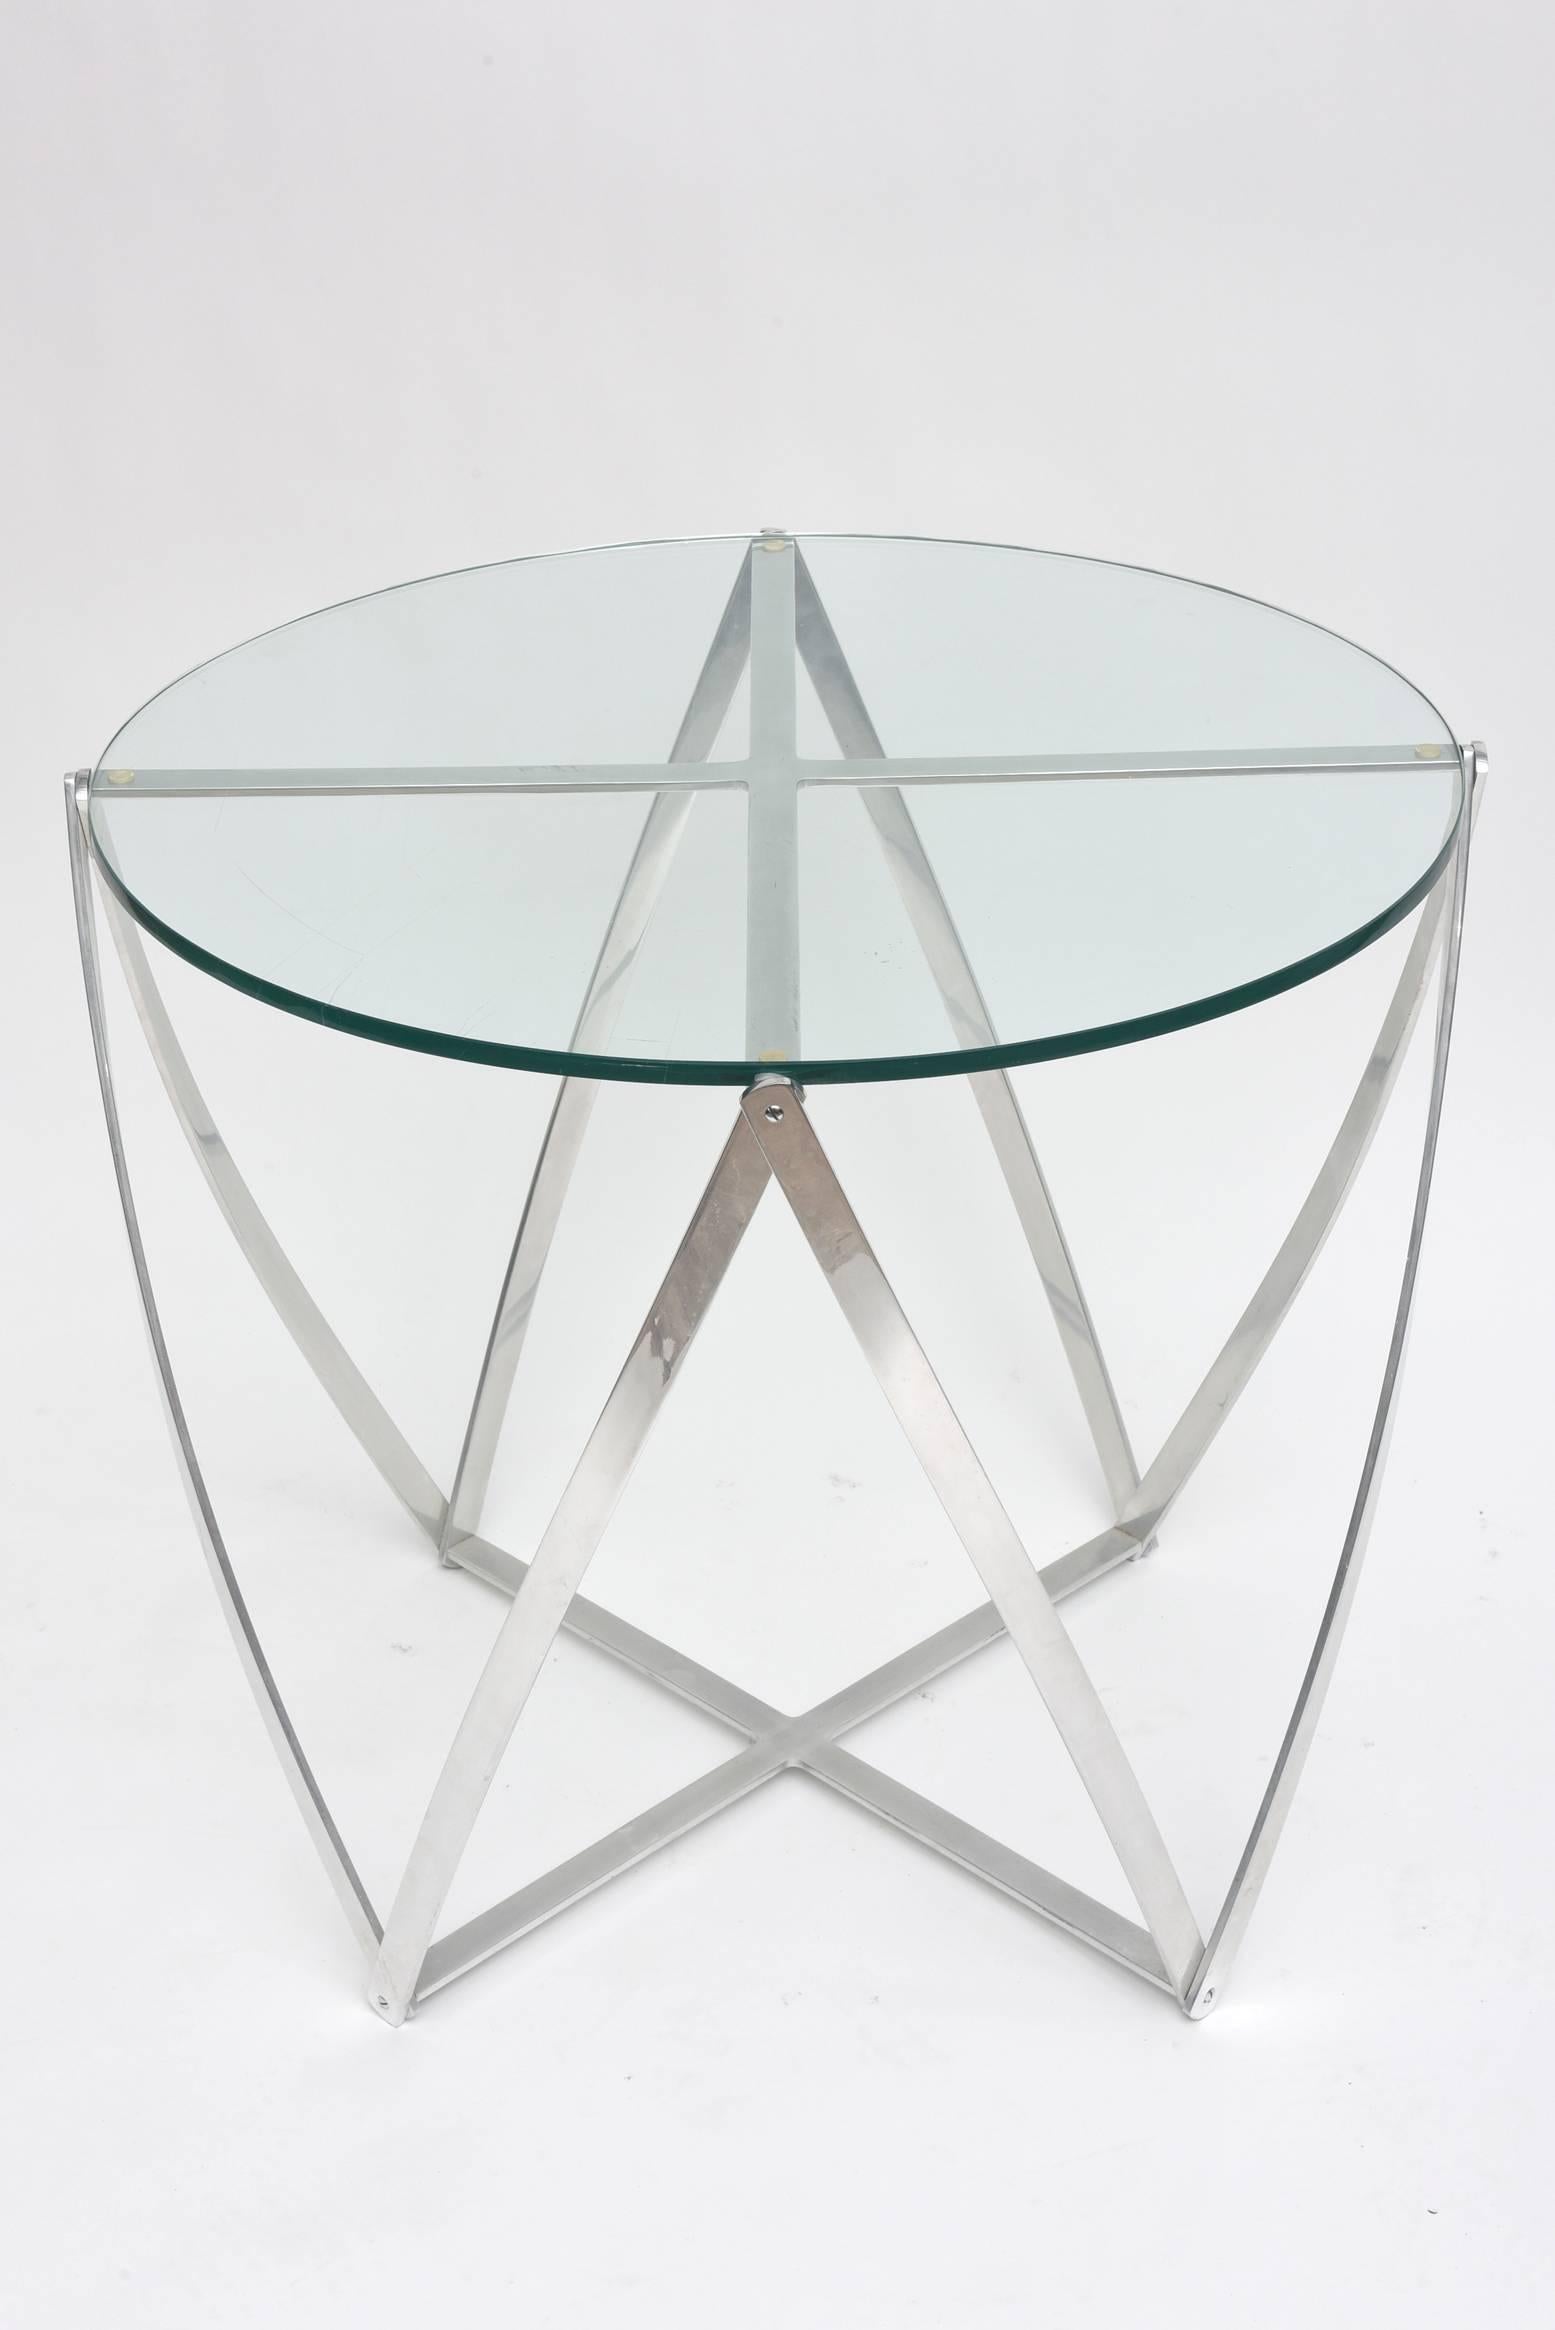 John Vesey spool table, this is the larger version of this table.